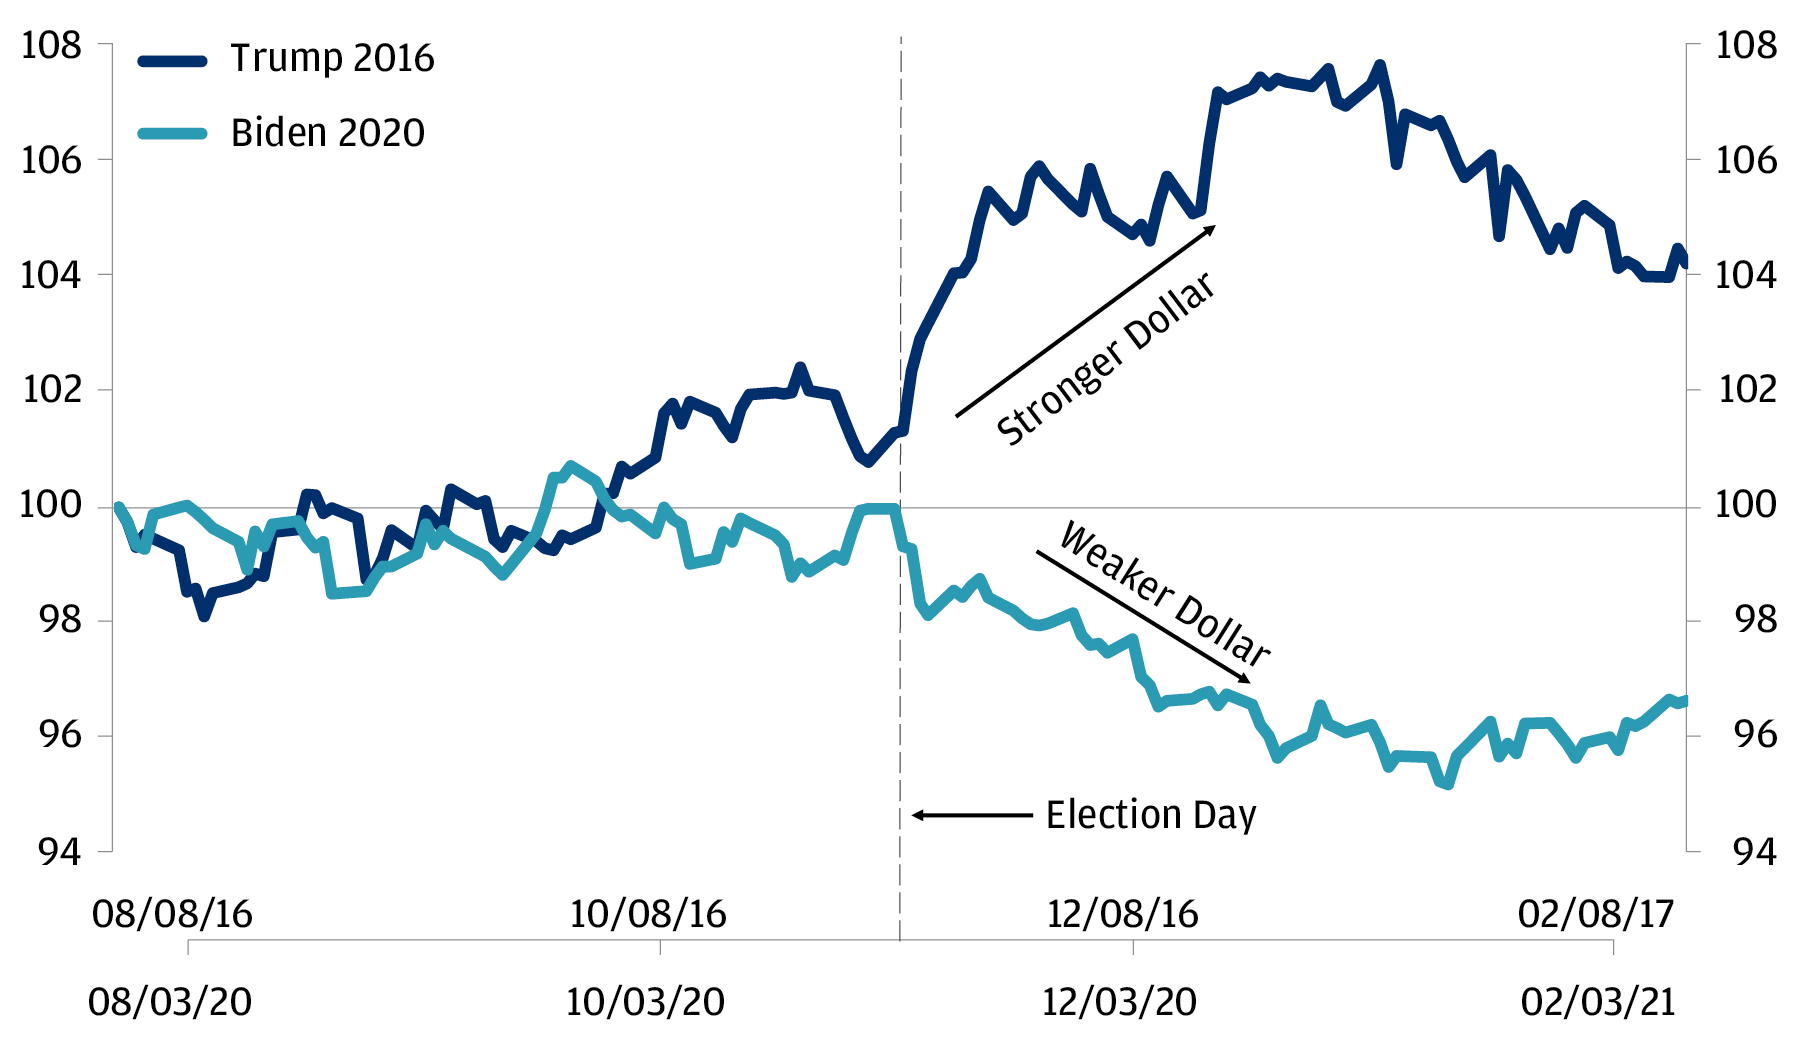 This chart shows the reaction of the U.S. dollar during the 2016 and 2020 U.S. presidential elections from three months prior through three months after. There are two lines, one which is the U.S. dollar in 2016 indexed to start where August 8, 2016 is 100 and the other is the U.S. dollar in 2020 indexed to start where August 3, 2020 = 100. 